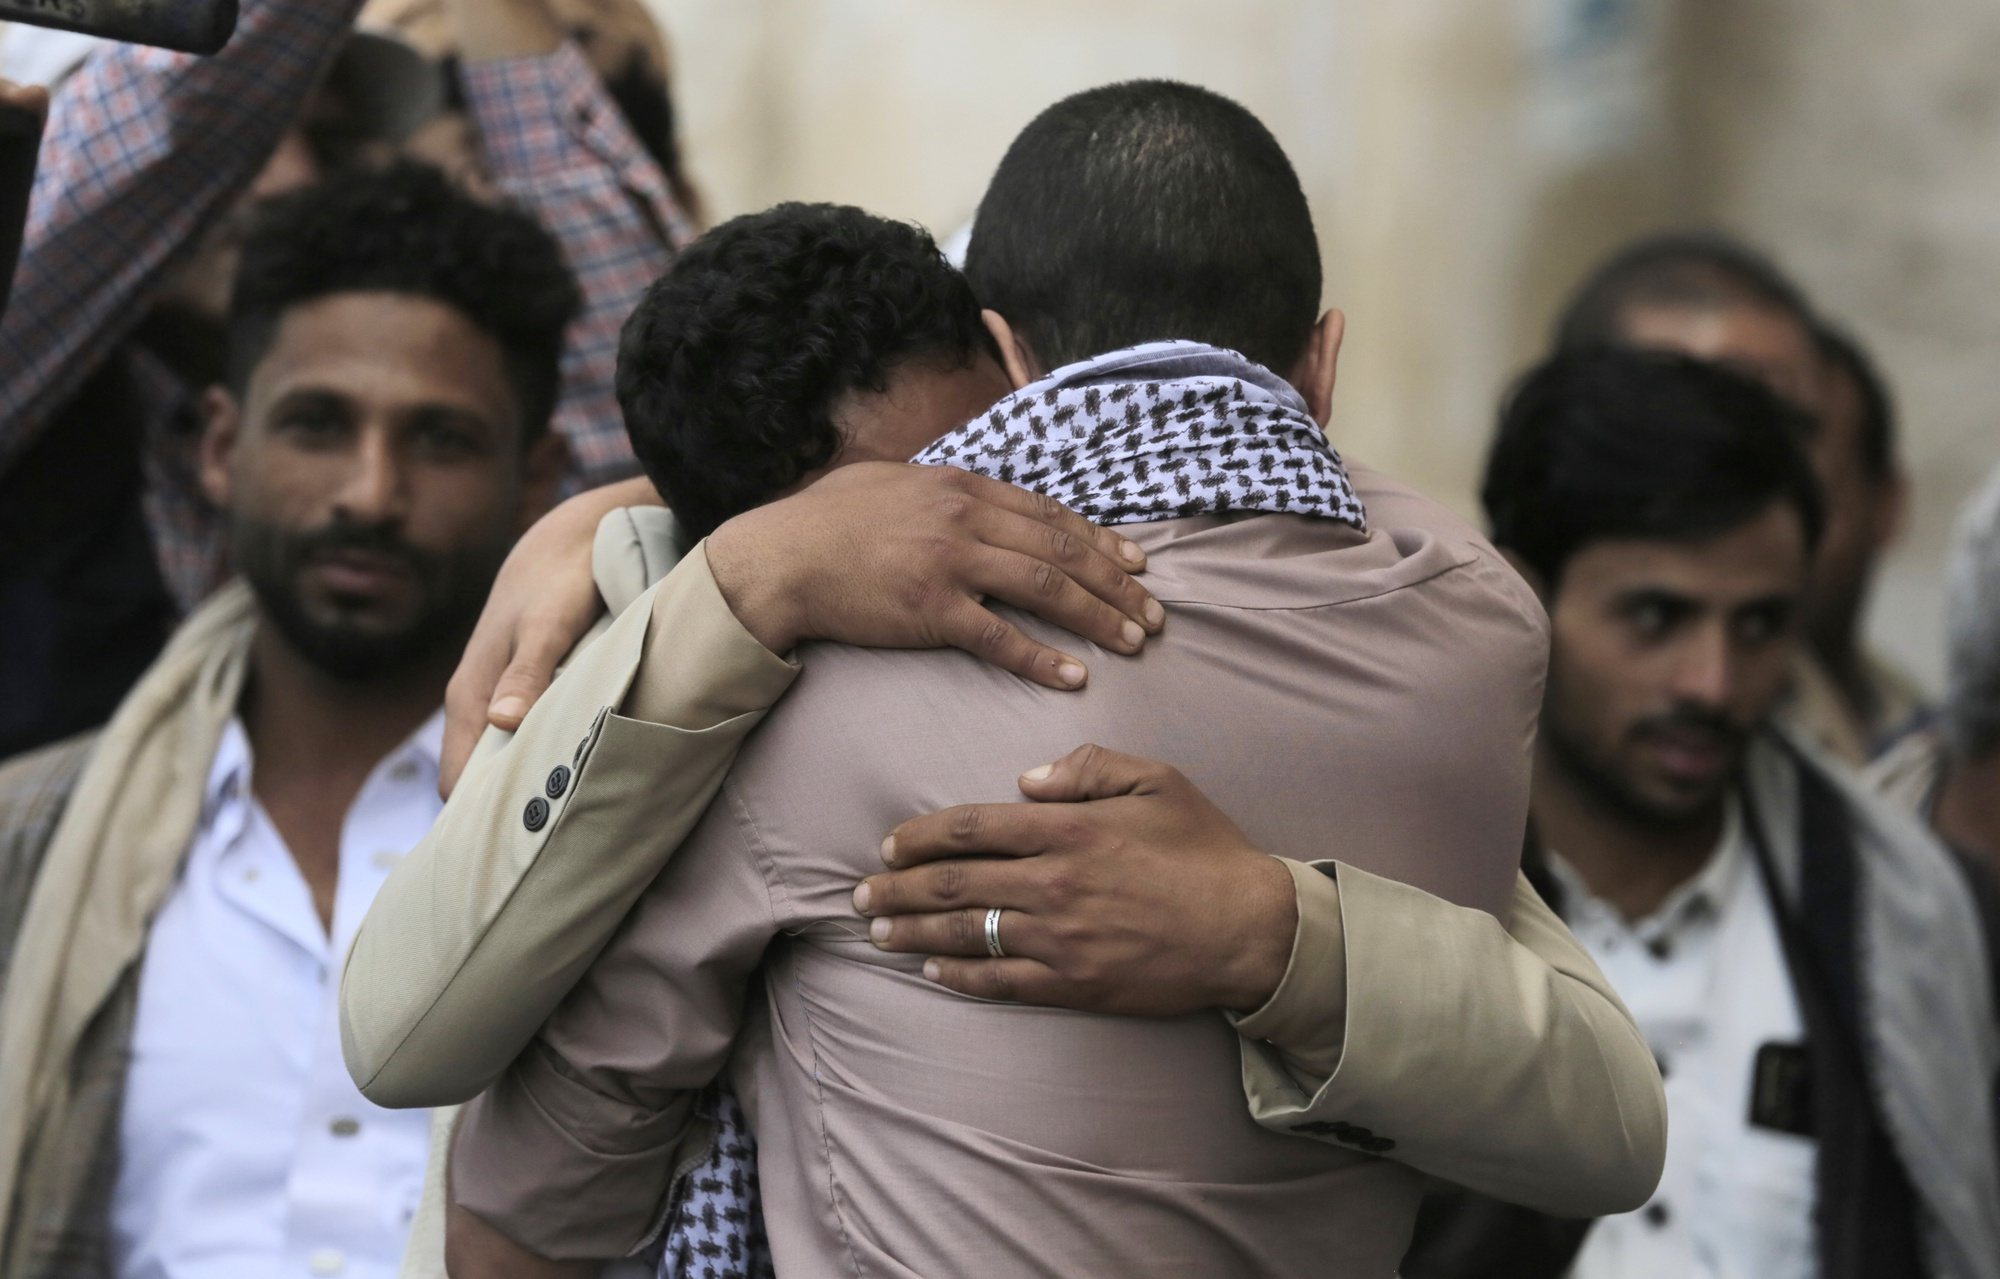 epa11370702 A released prisoner loyal to the Yemeni government embraces a relative during a unilateral release of 112 war prisoners, in Sana&#039;a, Yemen, 26 May 2024. Yemen&#039;s Houthis have freed unilaterally 112 war prisoners loyal to the Saudi-backed government of Yemen, in a fresh move to help revive a stalled peace process in the war-torn Arab country, according to a statement by the Houthis. The release came a year after a UN and ICRC-brokered prisoner swap was carried out by the warring sides in Yemen, in which 887 detainees were exchanged. Yemen has been experiencing the longest period of relative calm yet for over two years amid a United Nations-sponsored fragile truce between the Houthis and the government of Yemen after seven years of a full-blown armed conflict.  EPA/YAHYA ARHAB